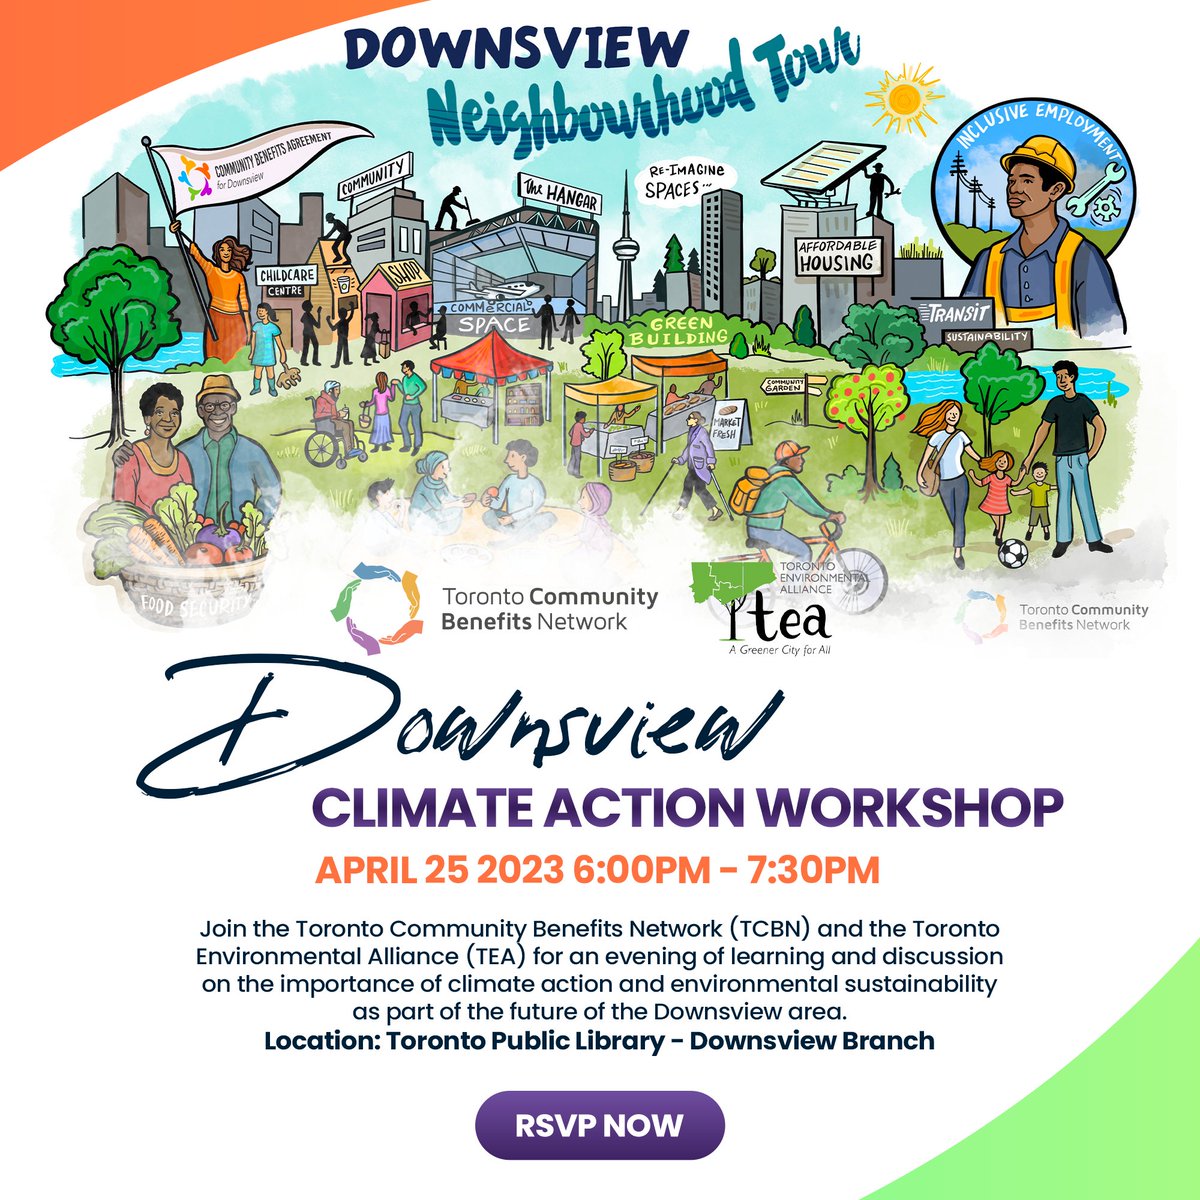 The Downsview Climate Action workshop presented by TCBN and @TOenviro will be a discussion on the importance of climate action Where: Toronto Public Library - Downsview Branch When: APRIL 25 2023 6:00PM - 7:30PM RSVP: communitybenefits.ca/downsview_clim… #communitybenefits #climateaction